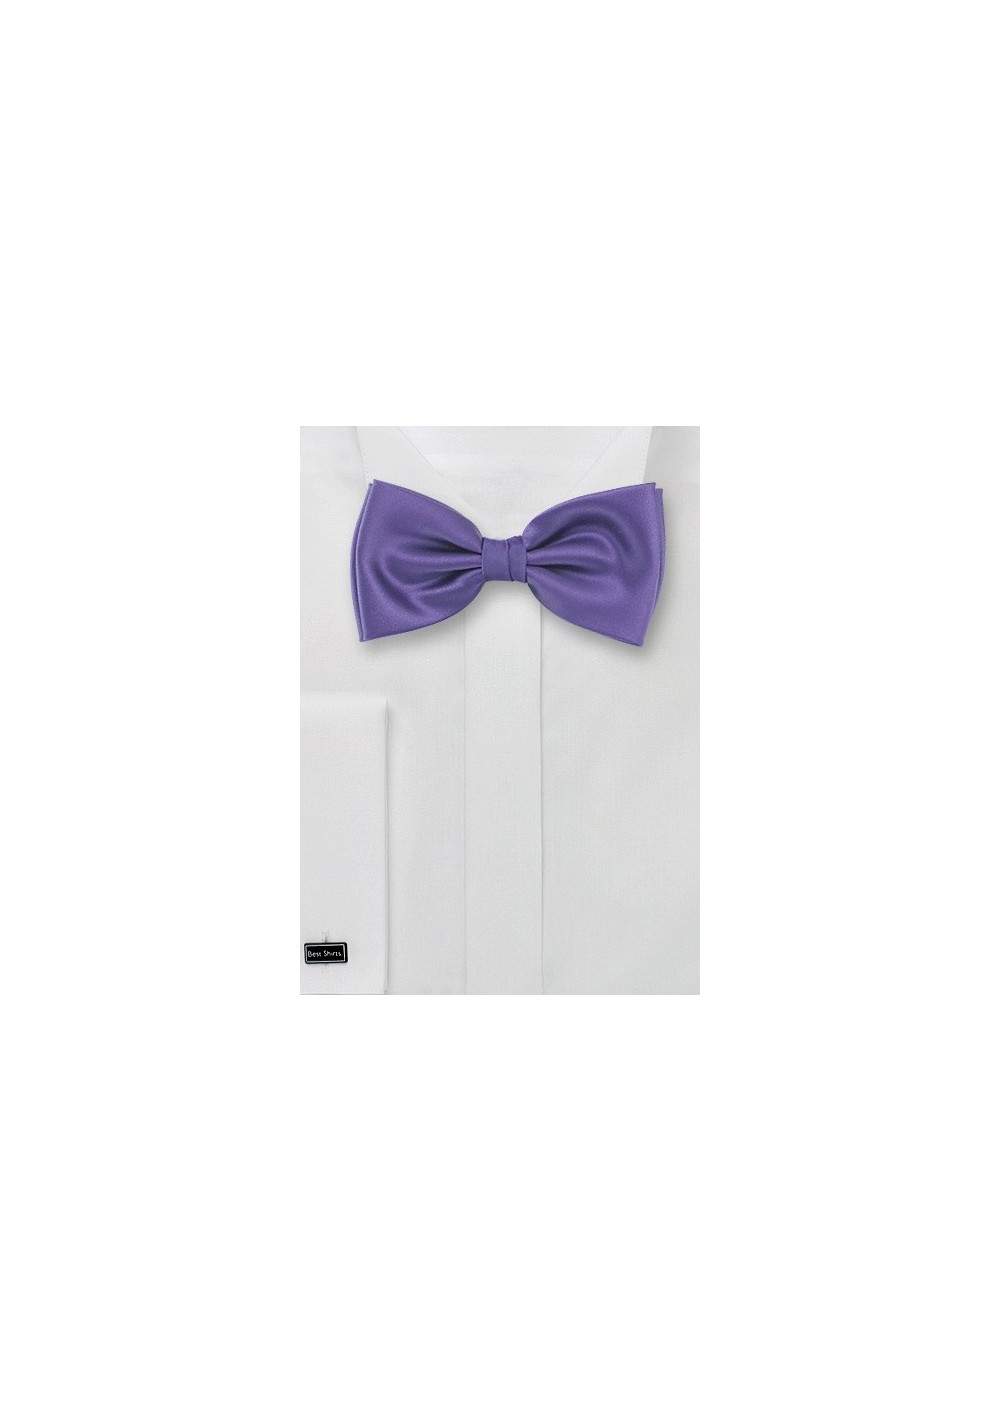 Rich Lilac Colored Bow Tie